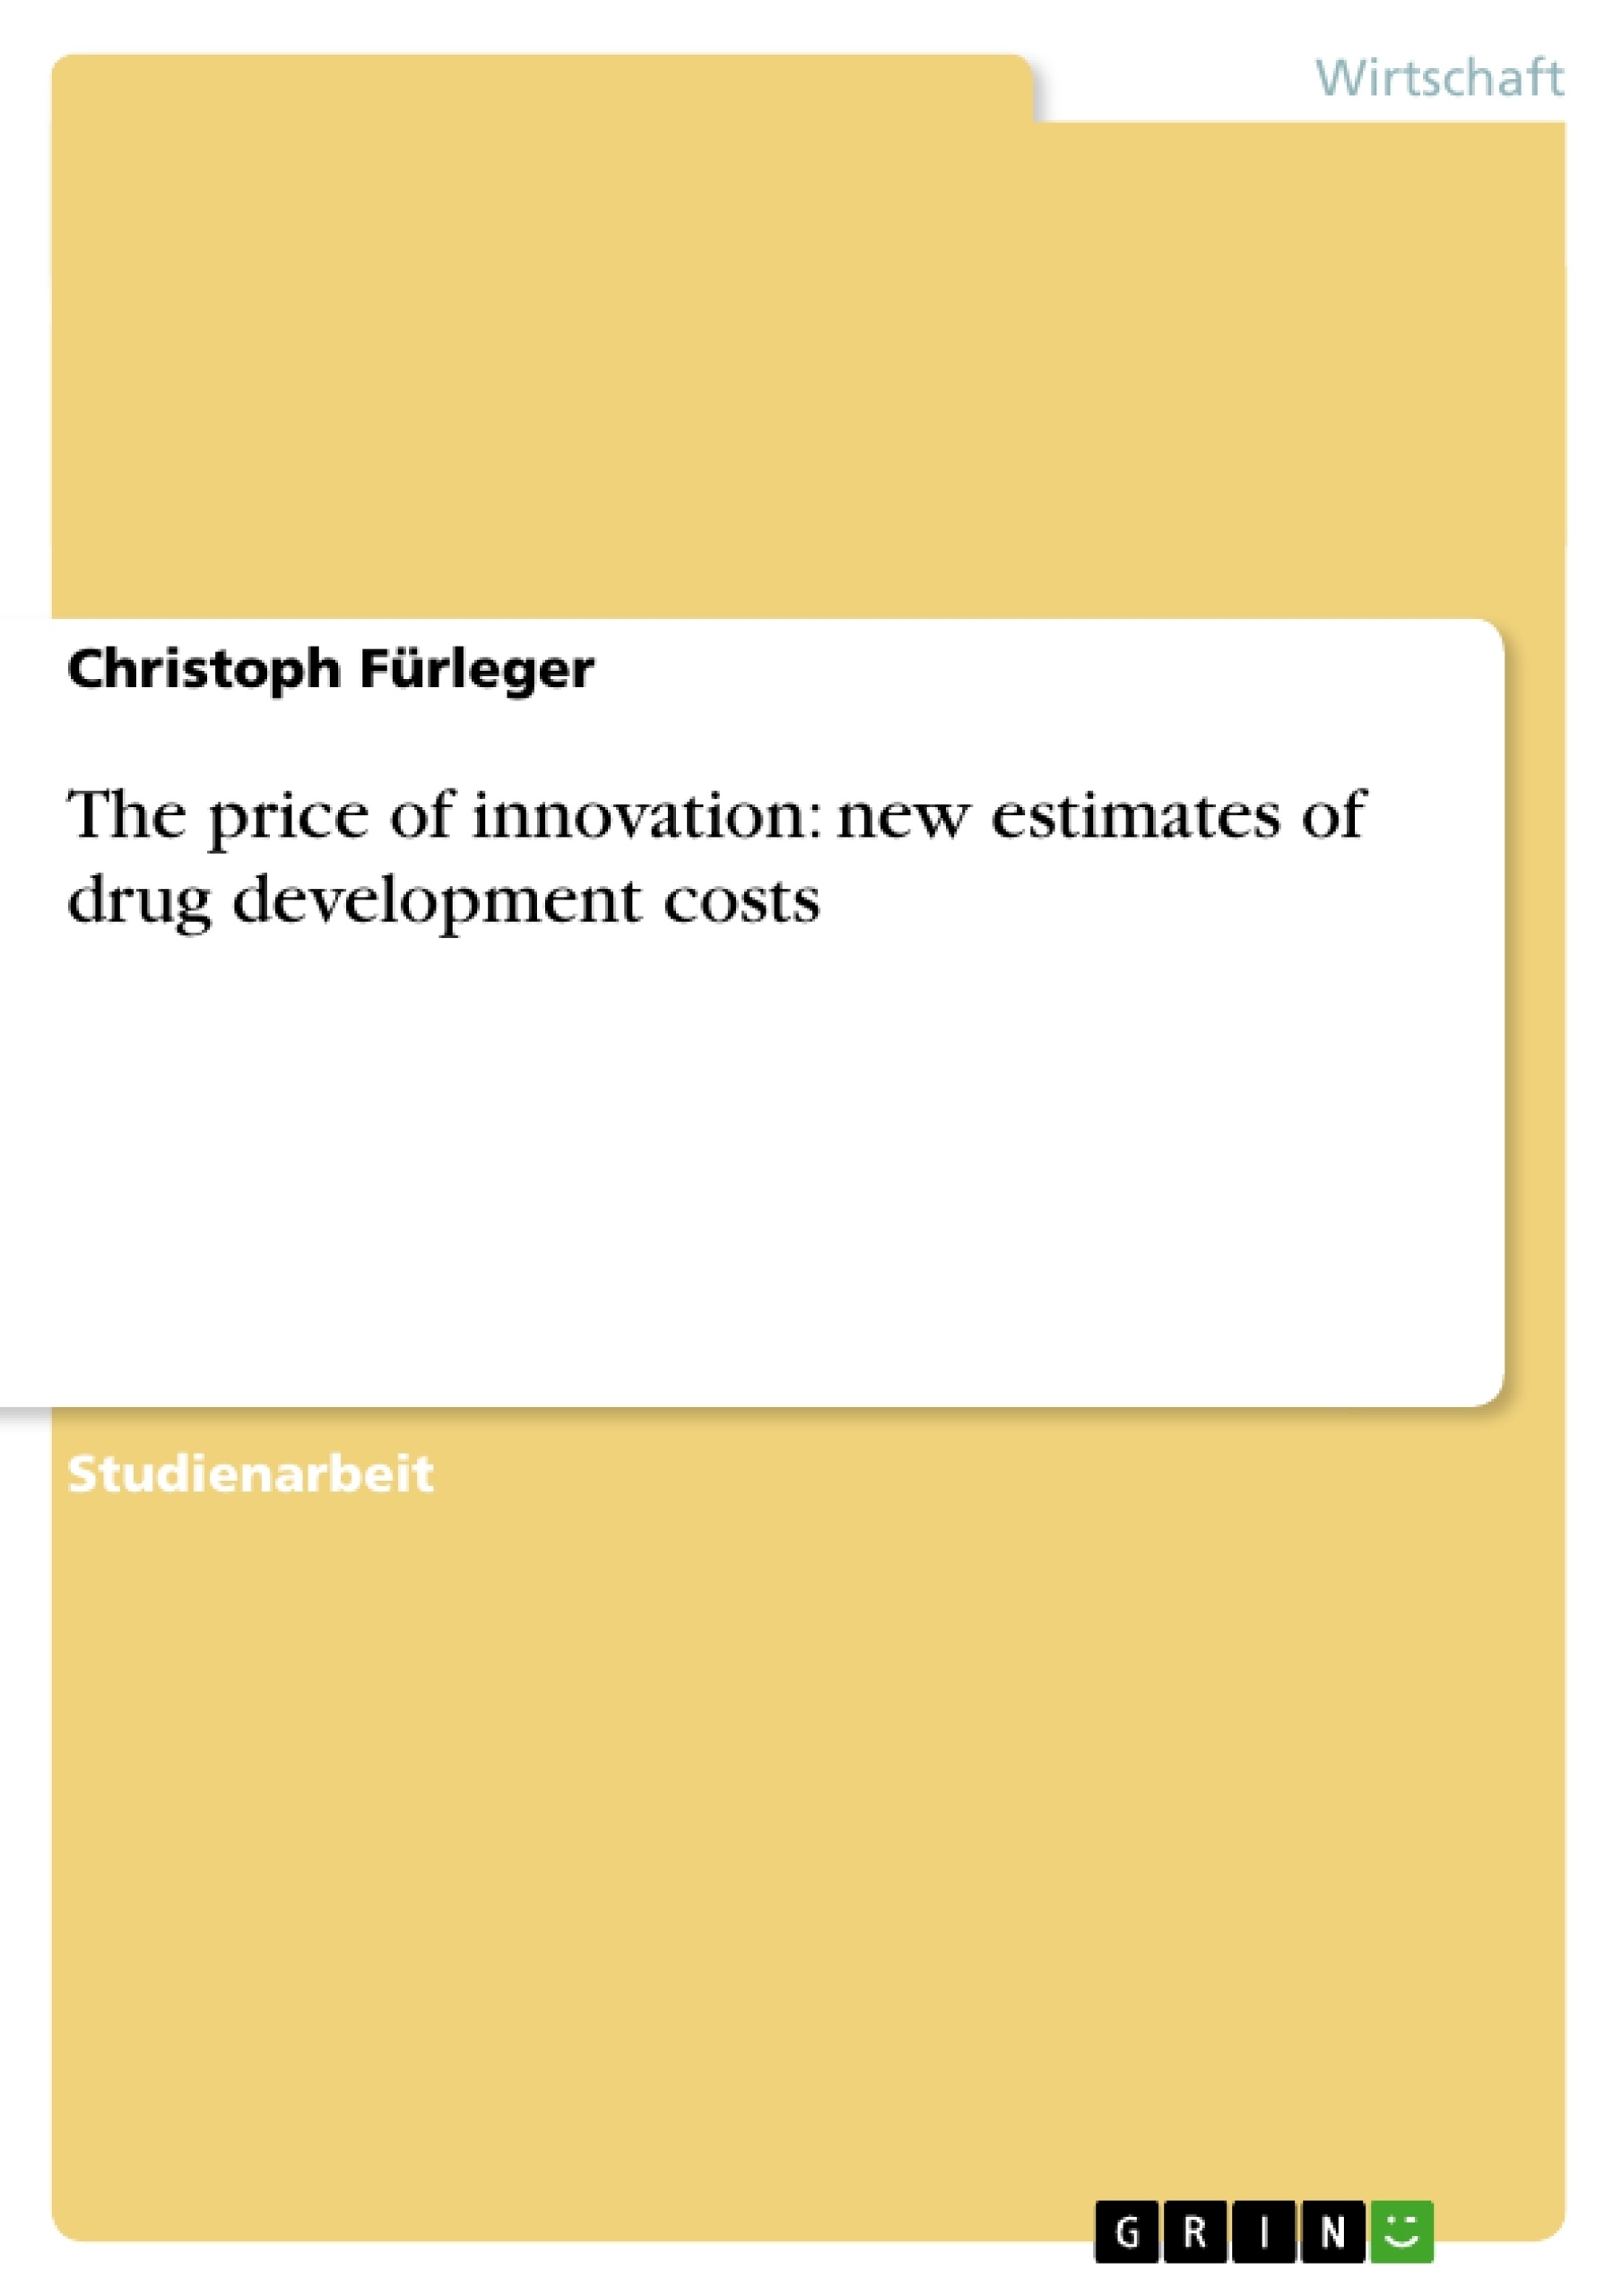 Title: The price of innovation: new estimates of drug development costs